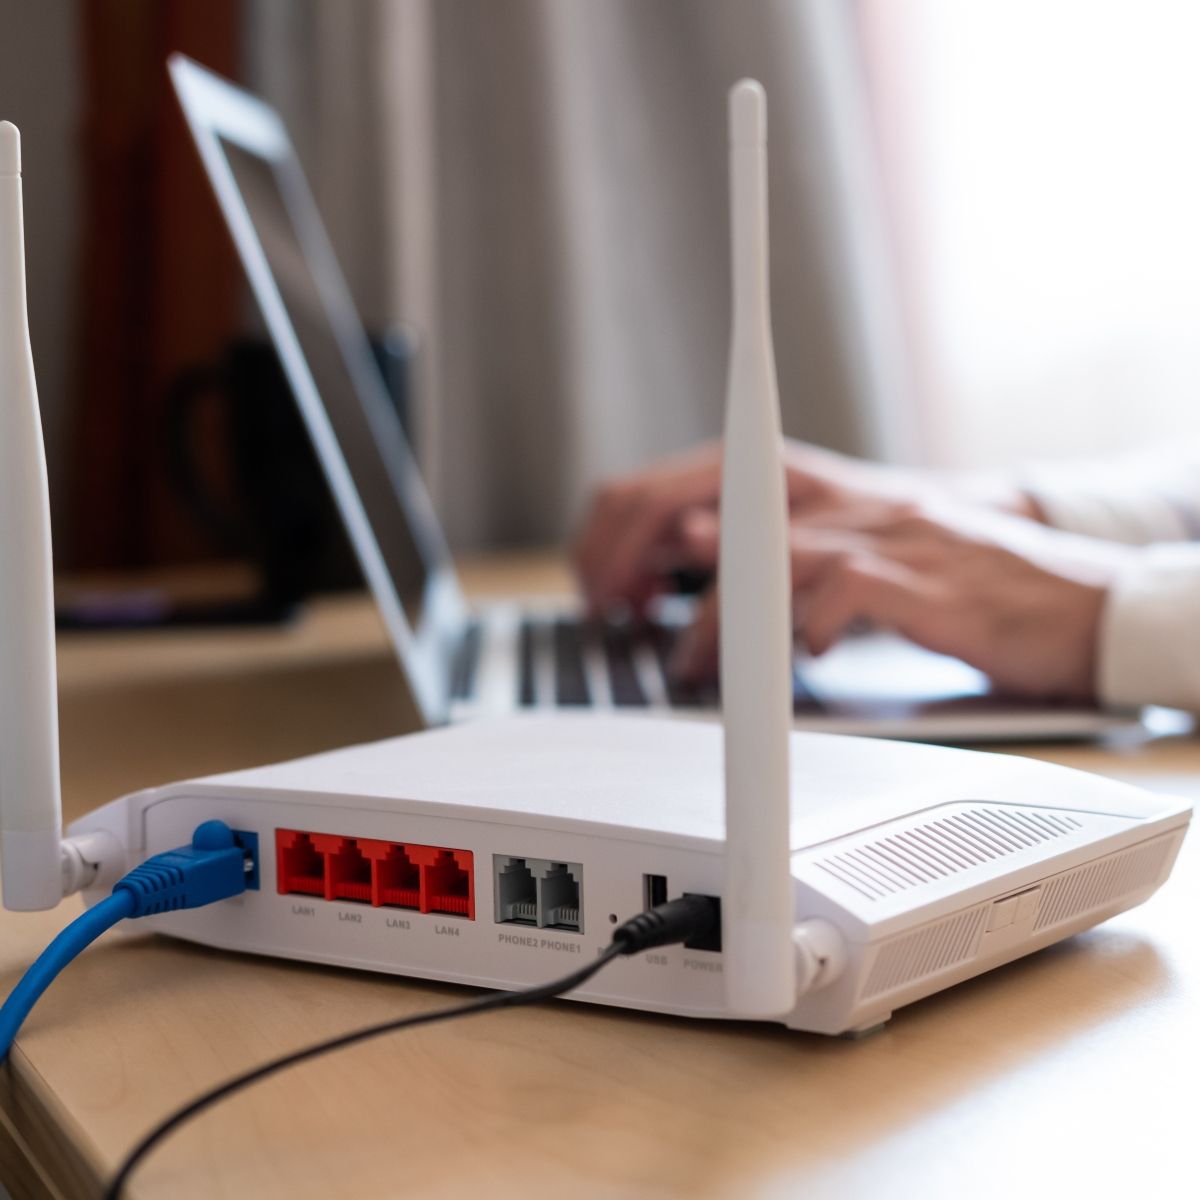 Router in front of a laptop